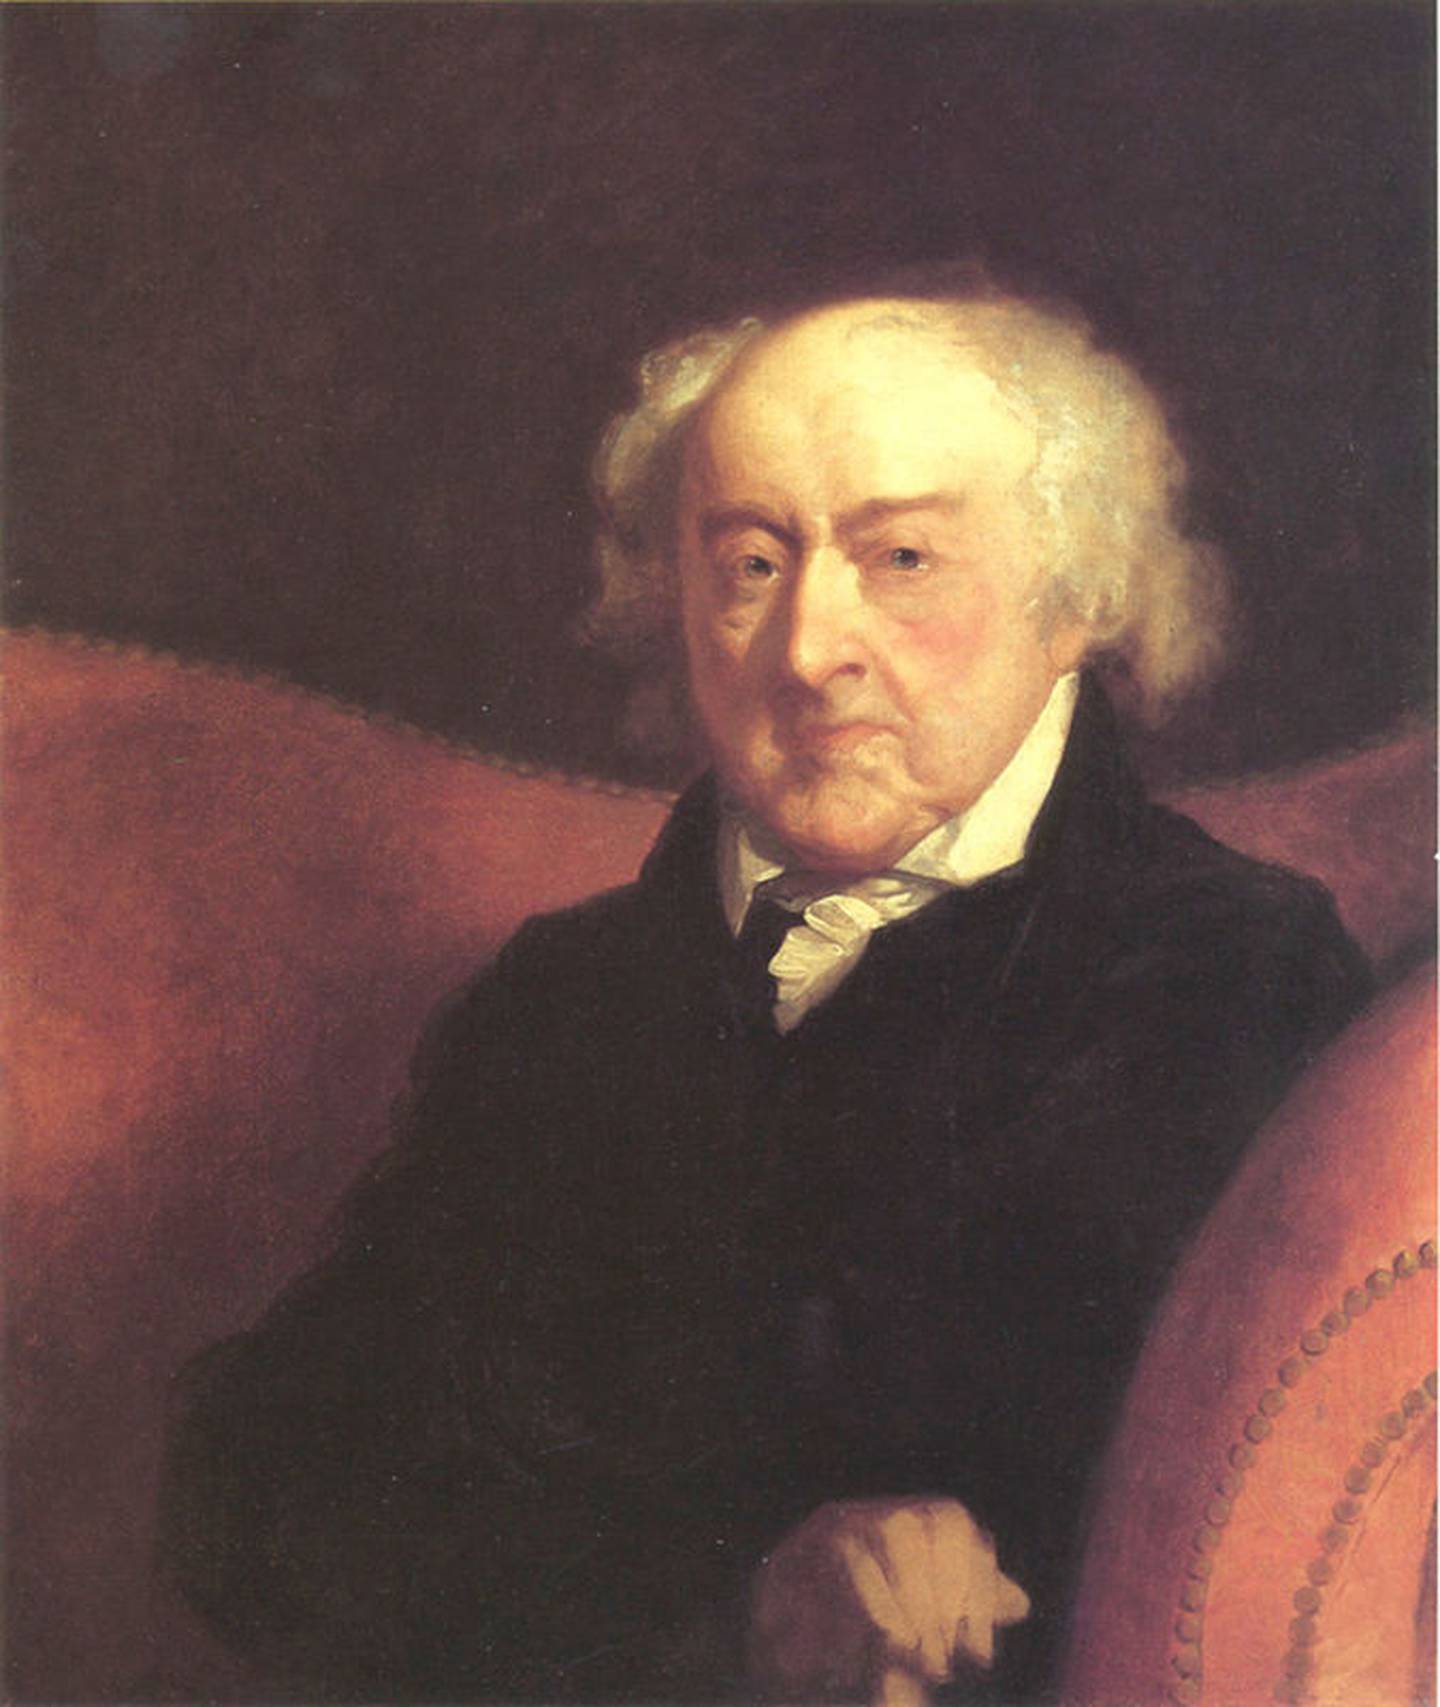 John Adams, 90 years old when he died, was both a friend and rival of Thomas Jefferson. Both signed the Declaration of Independence and served as presidents.